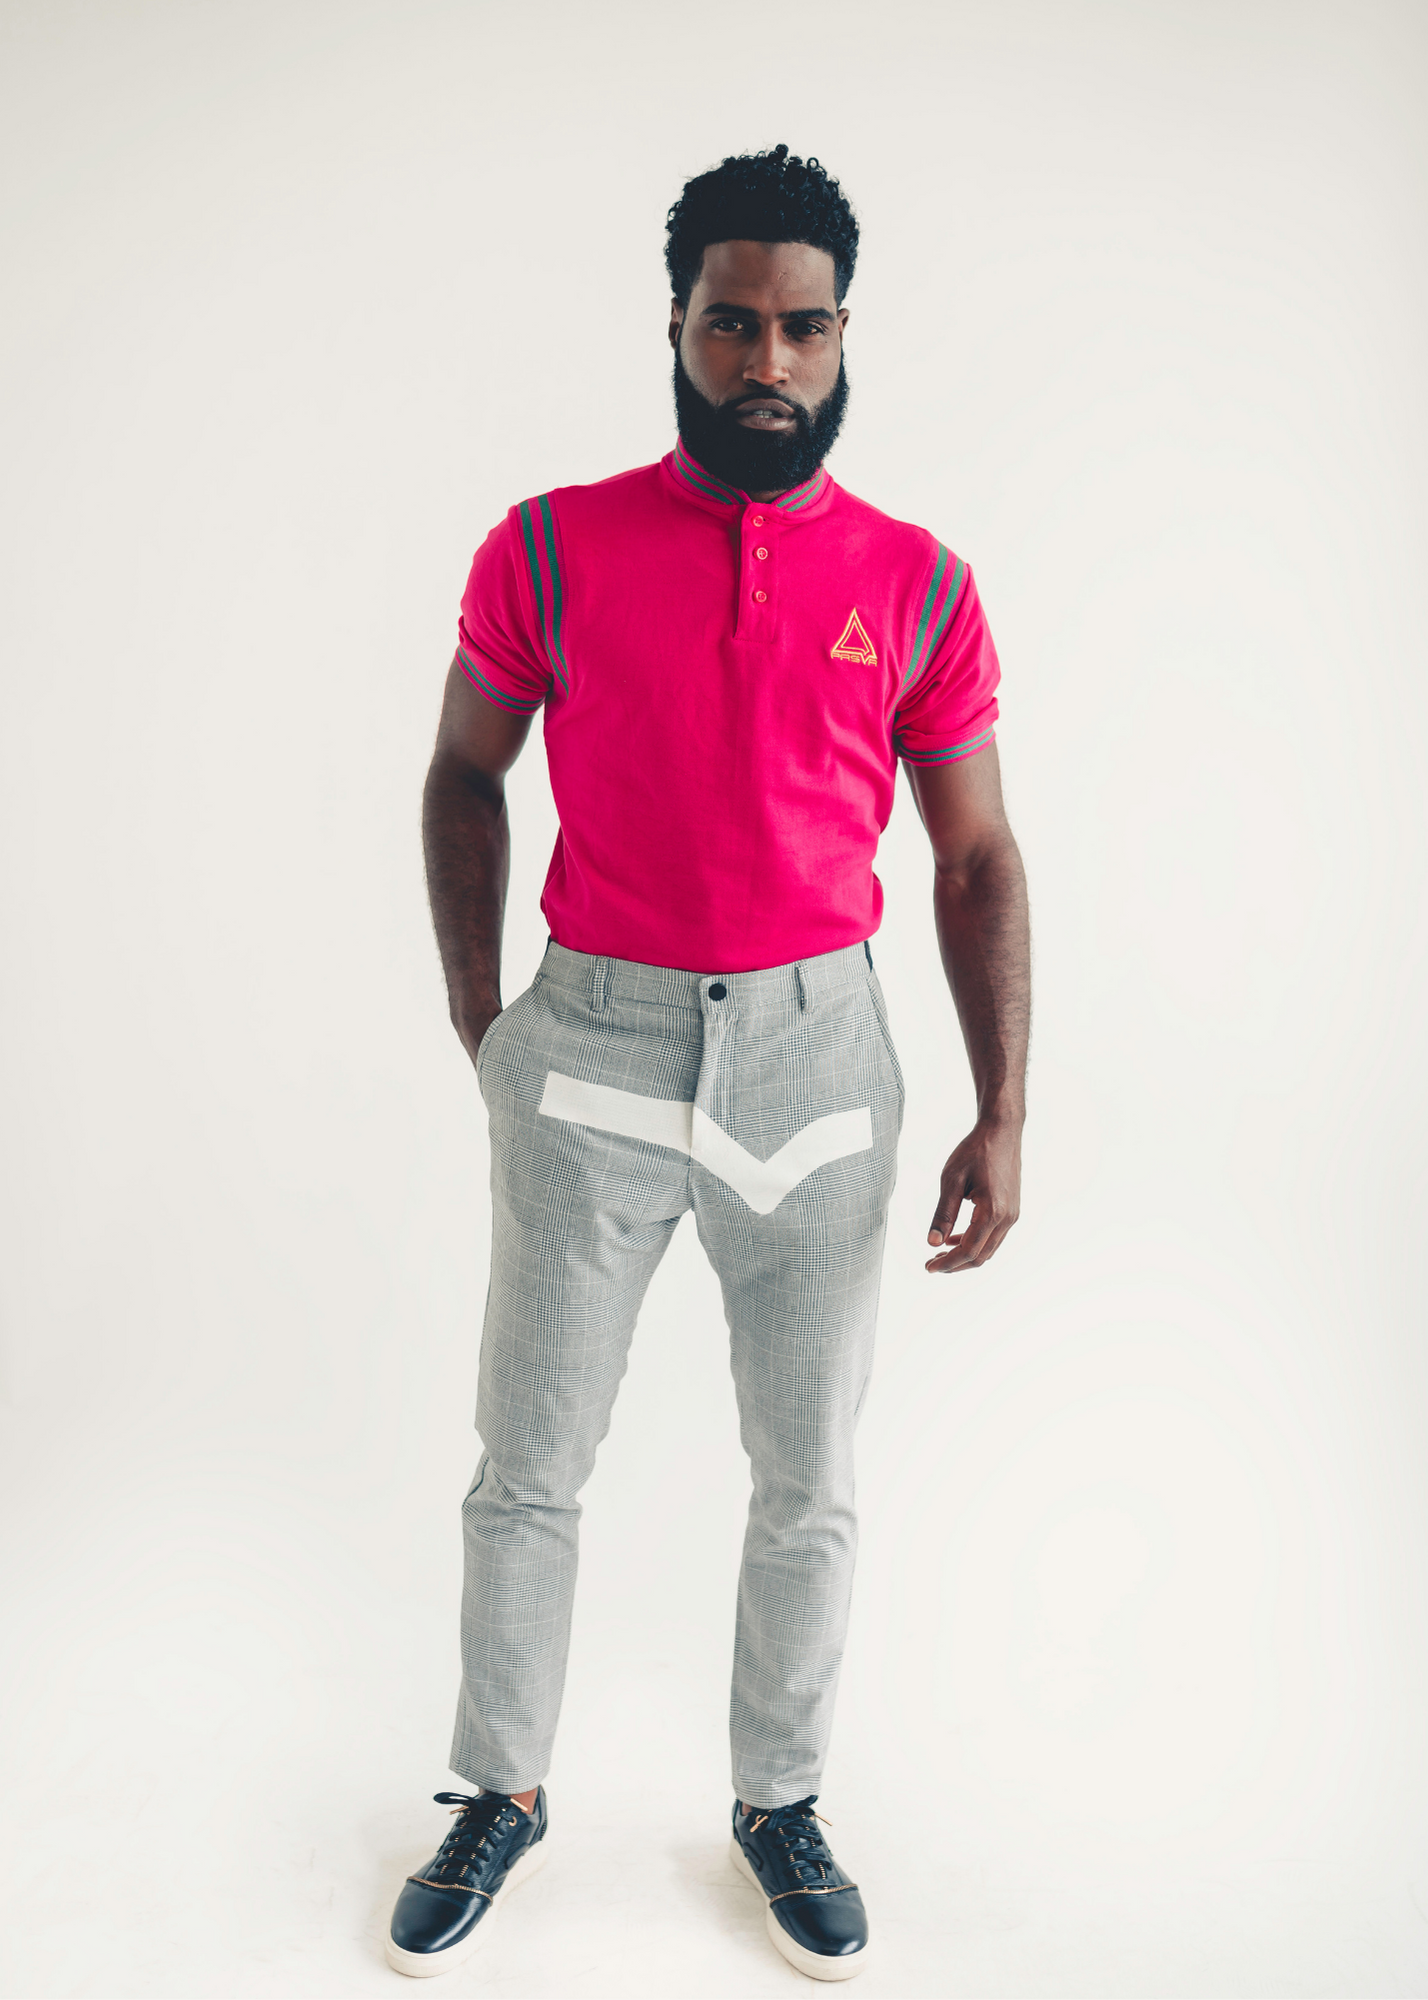 The Designer Polo (pink/green/gold)